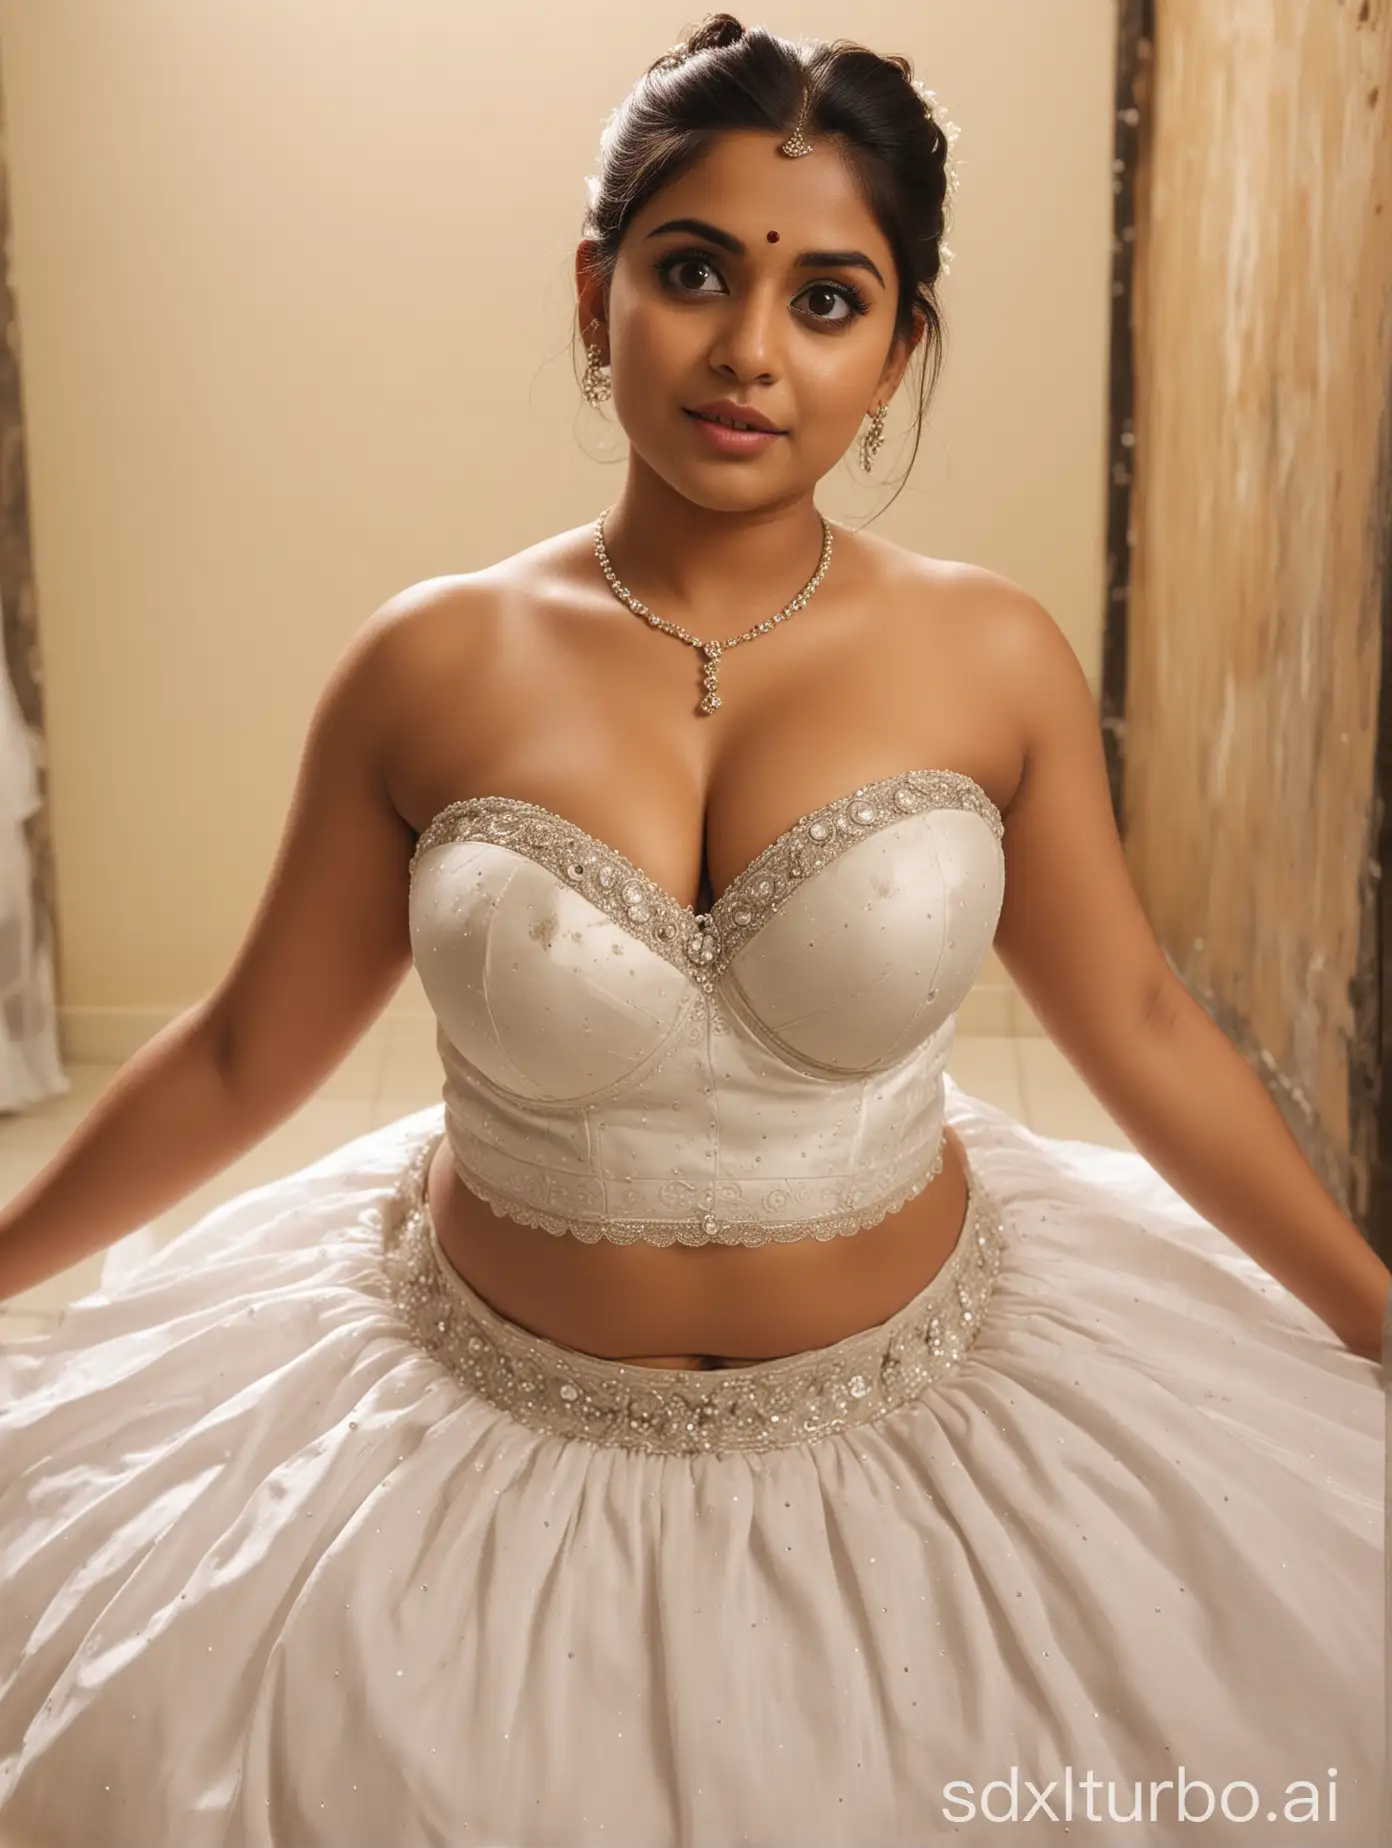 CURVY indian church bride with huge boobs flat belly, with Plump female body and hair bun, with white strapless bra with deep cleavage and low waist bridal skirt, she has busty body, is sitting at the well lit dressing room. big eyes, blurred background, ultra focus, face illuminated, face detailed, 16k resolution, full body view.